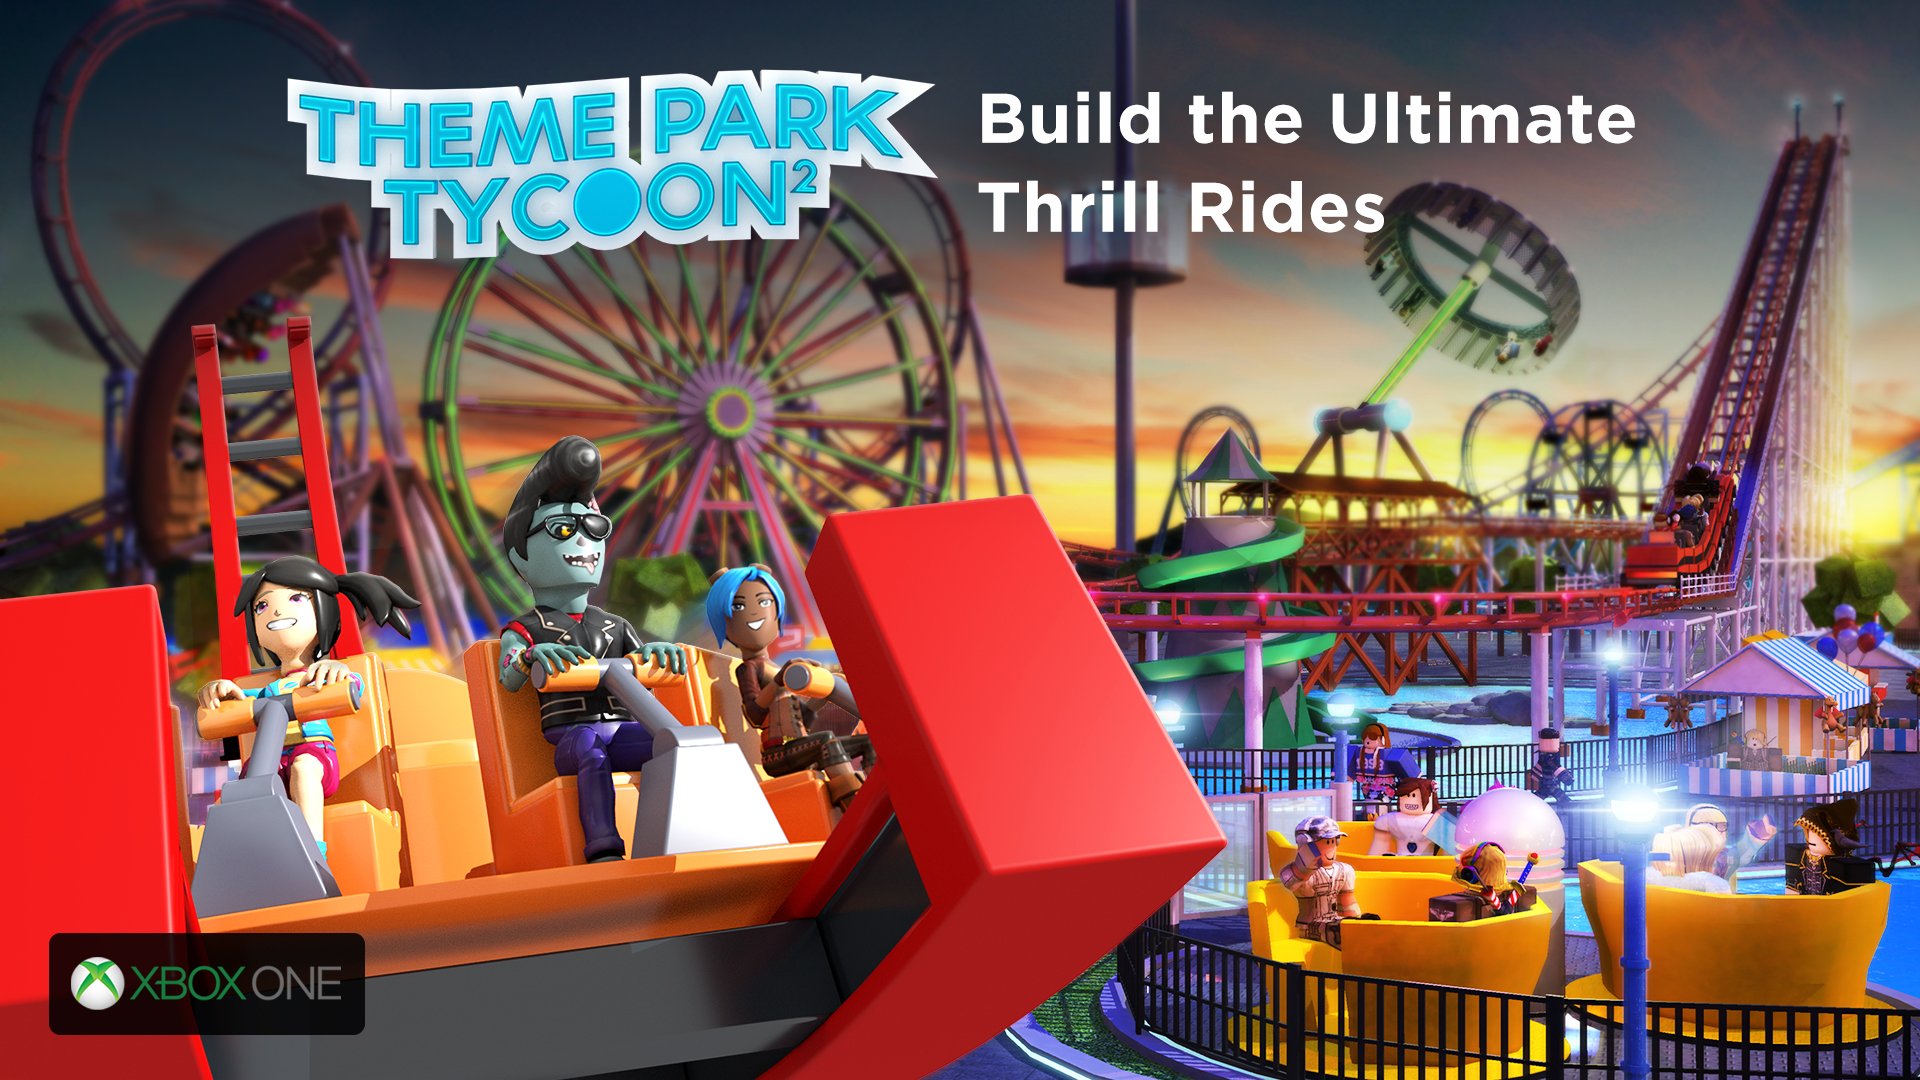 Roblox On Twitter Hold On Tight To The Controller The High Speed Drops Loops And Thrills Of Theme Park Tycoon 2 Are Now Available On Xbox Https T Co G1osqtfmlt Https T Co 04q9k5gfeb - how to build a looping coaster roblox theme park tycoon